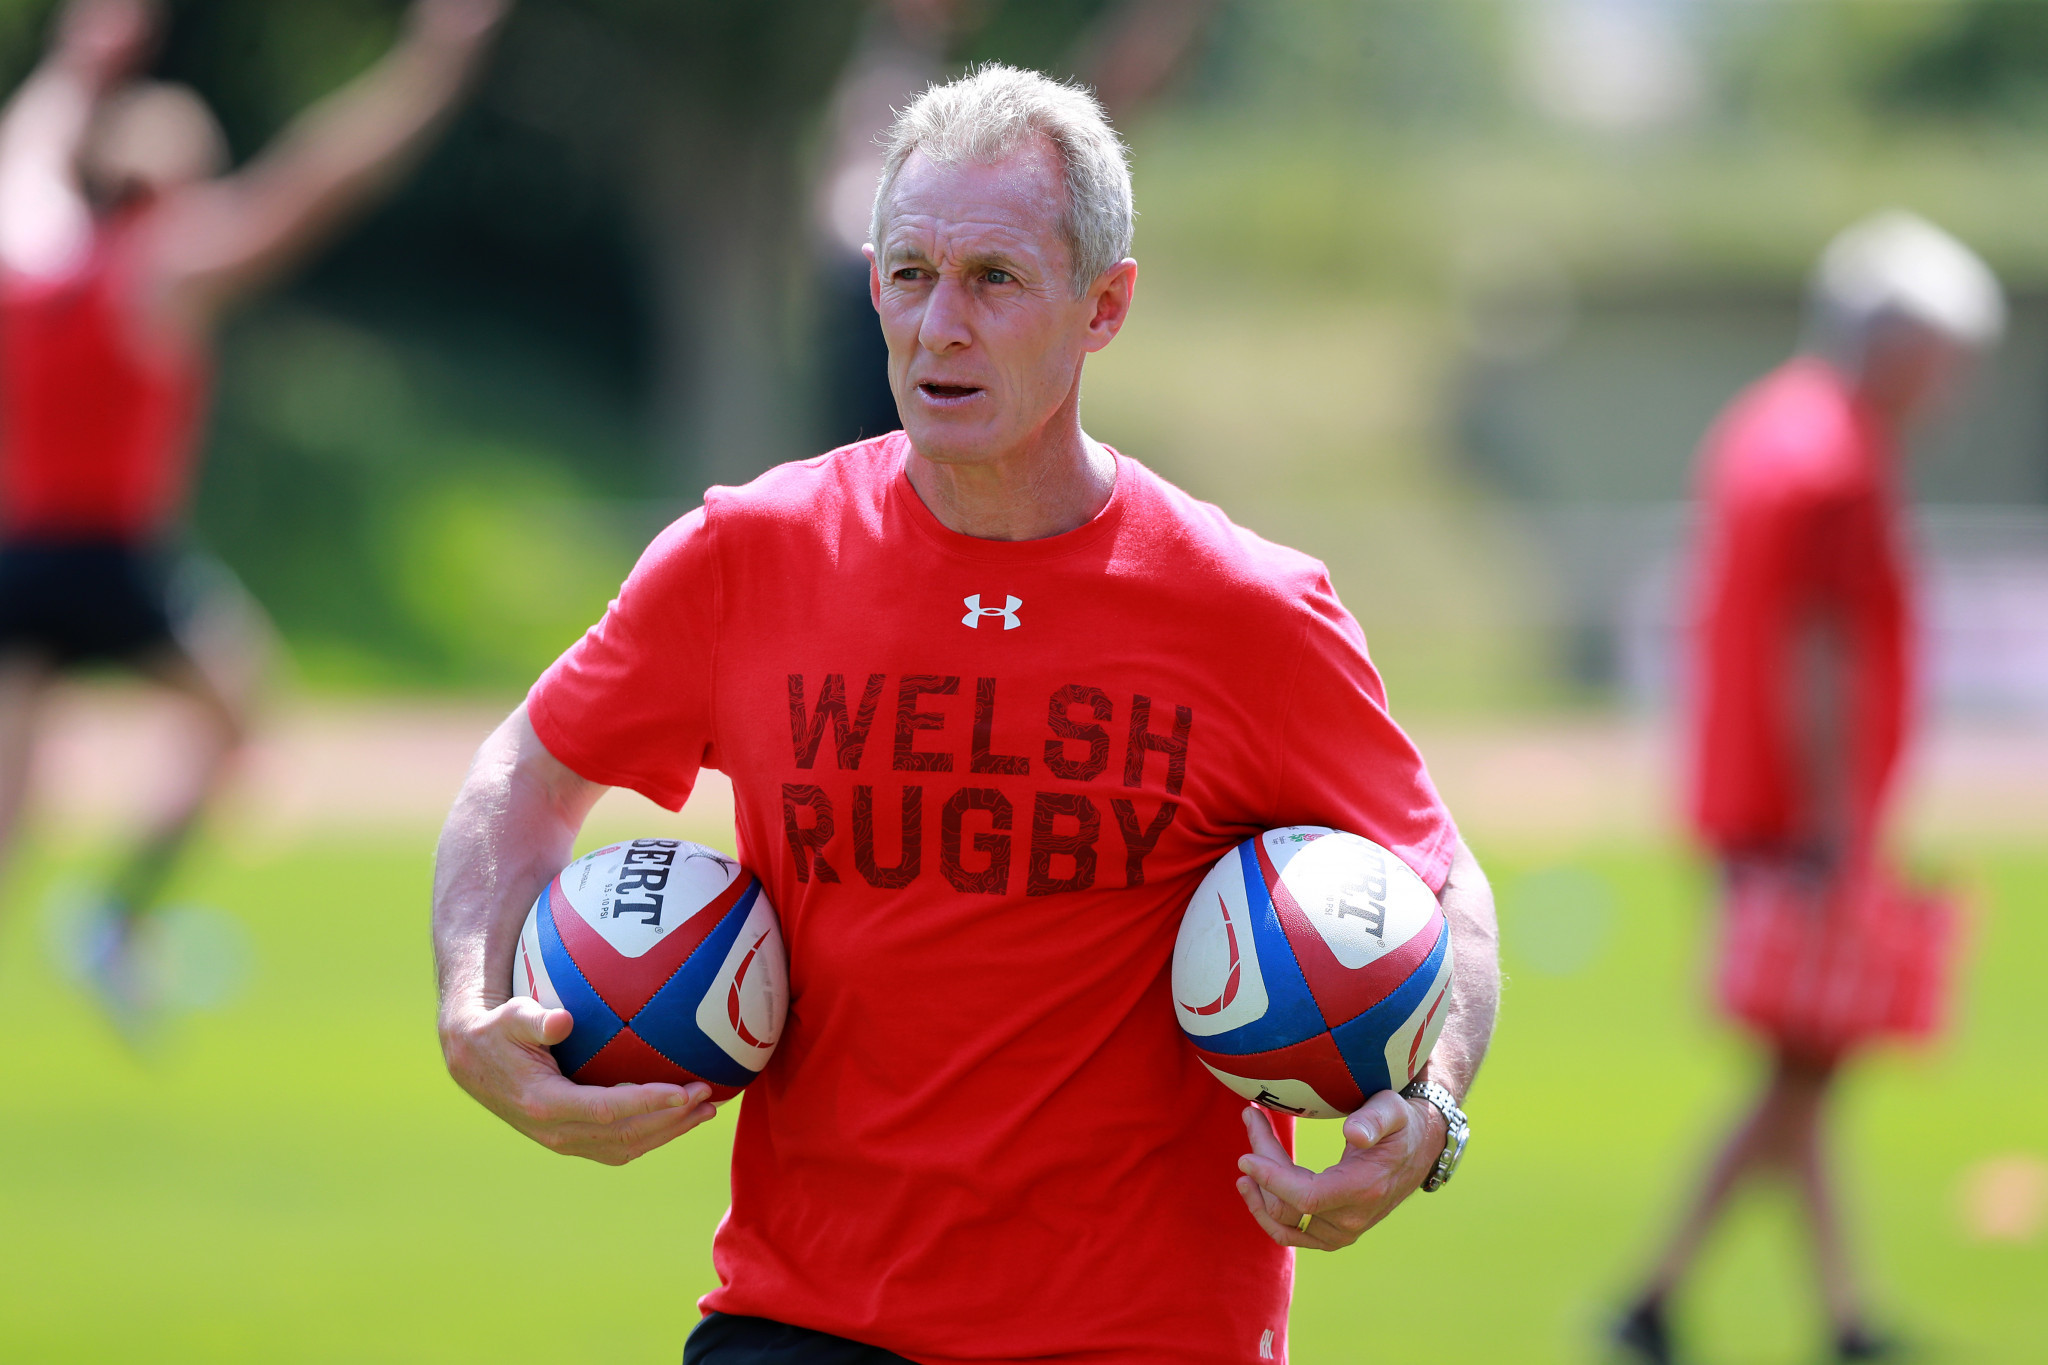 Wales coach Howley banned for 18 months for illegal betting on rugby